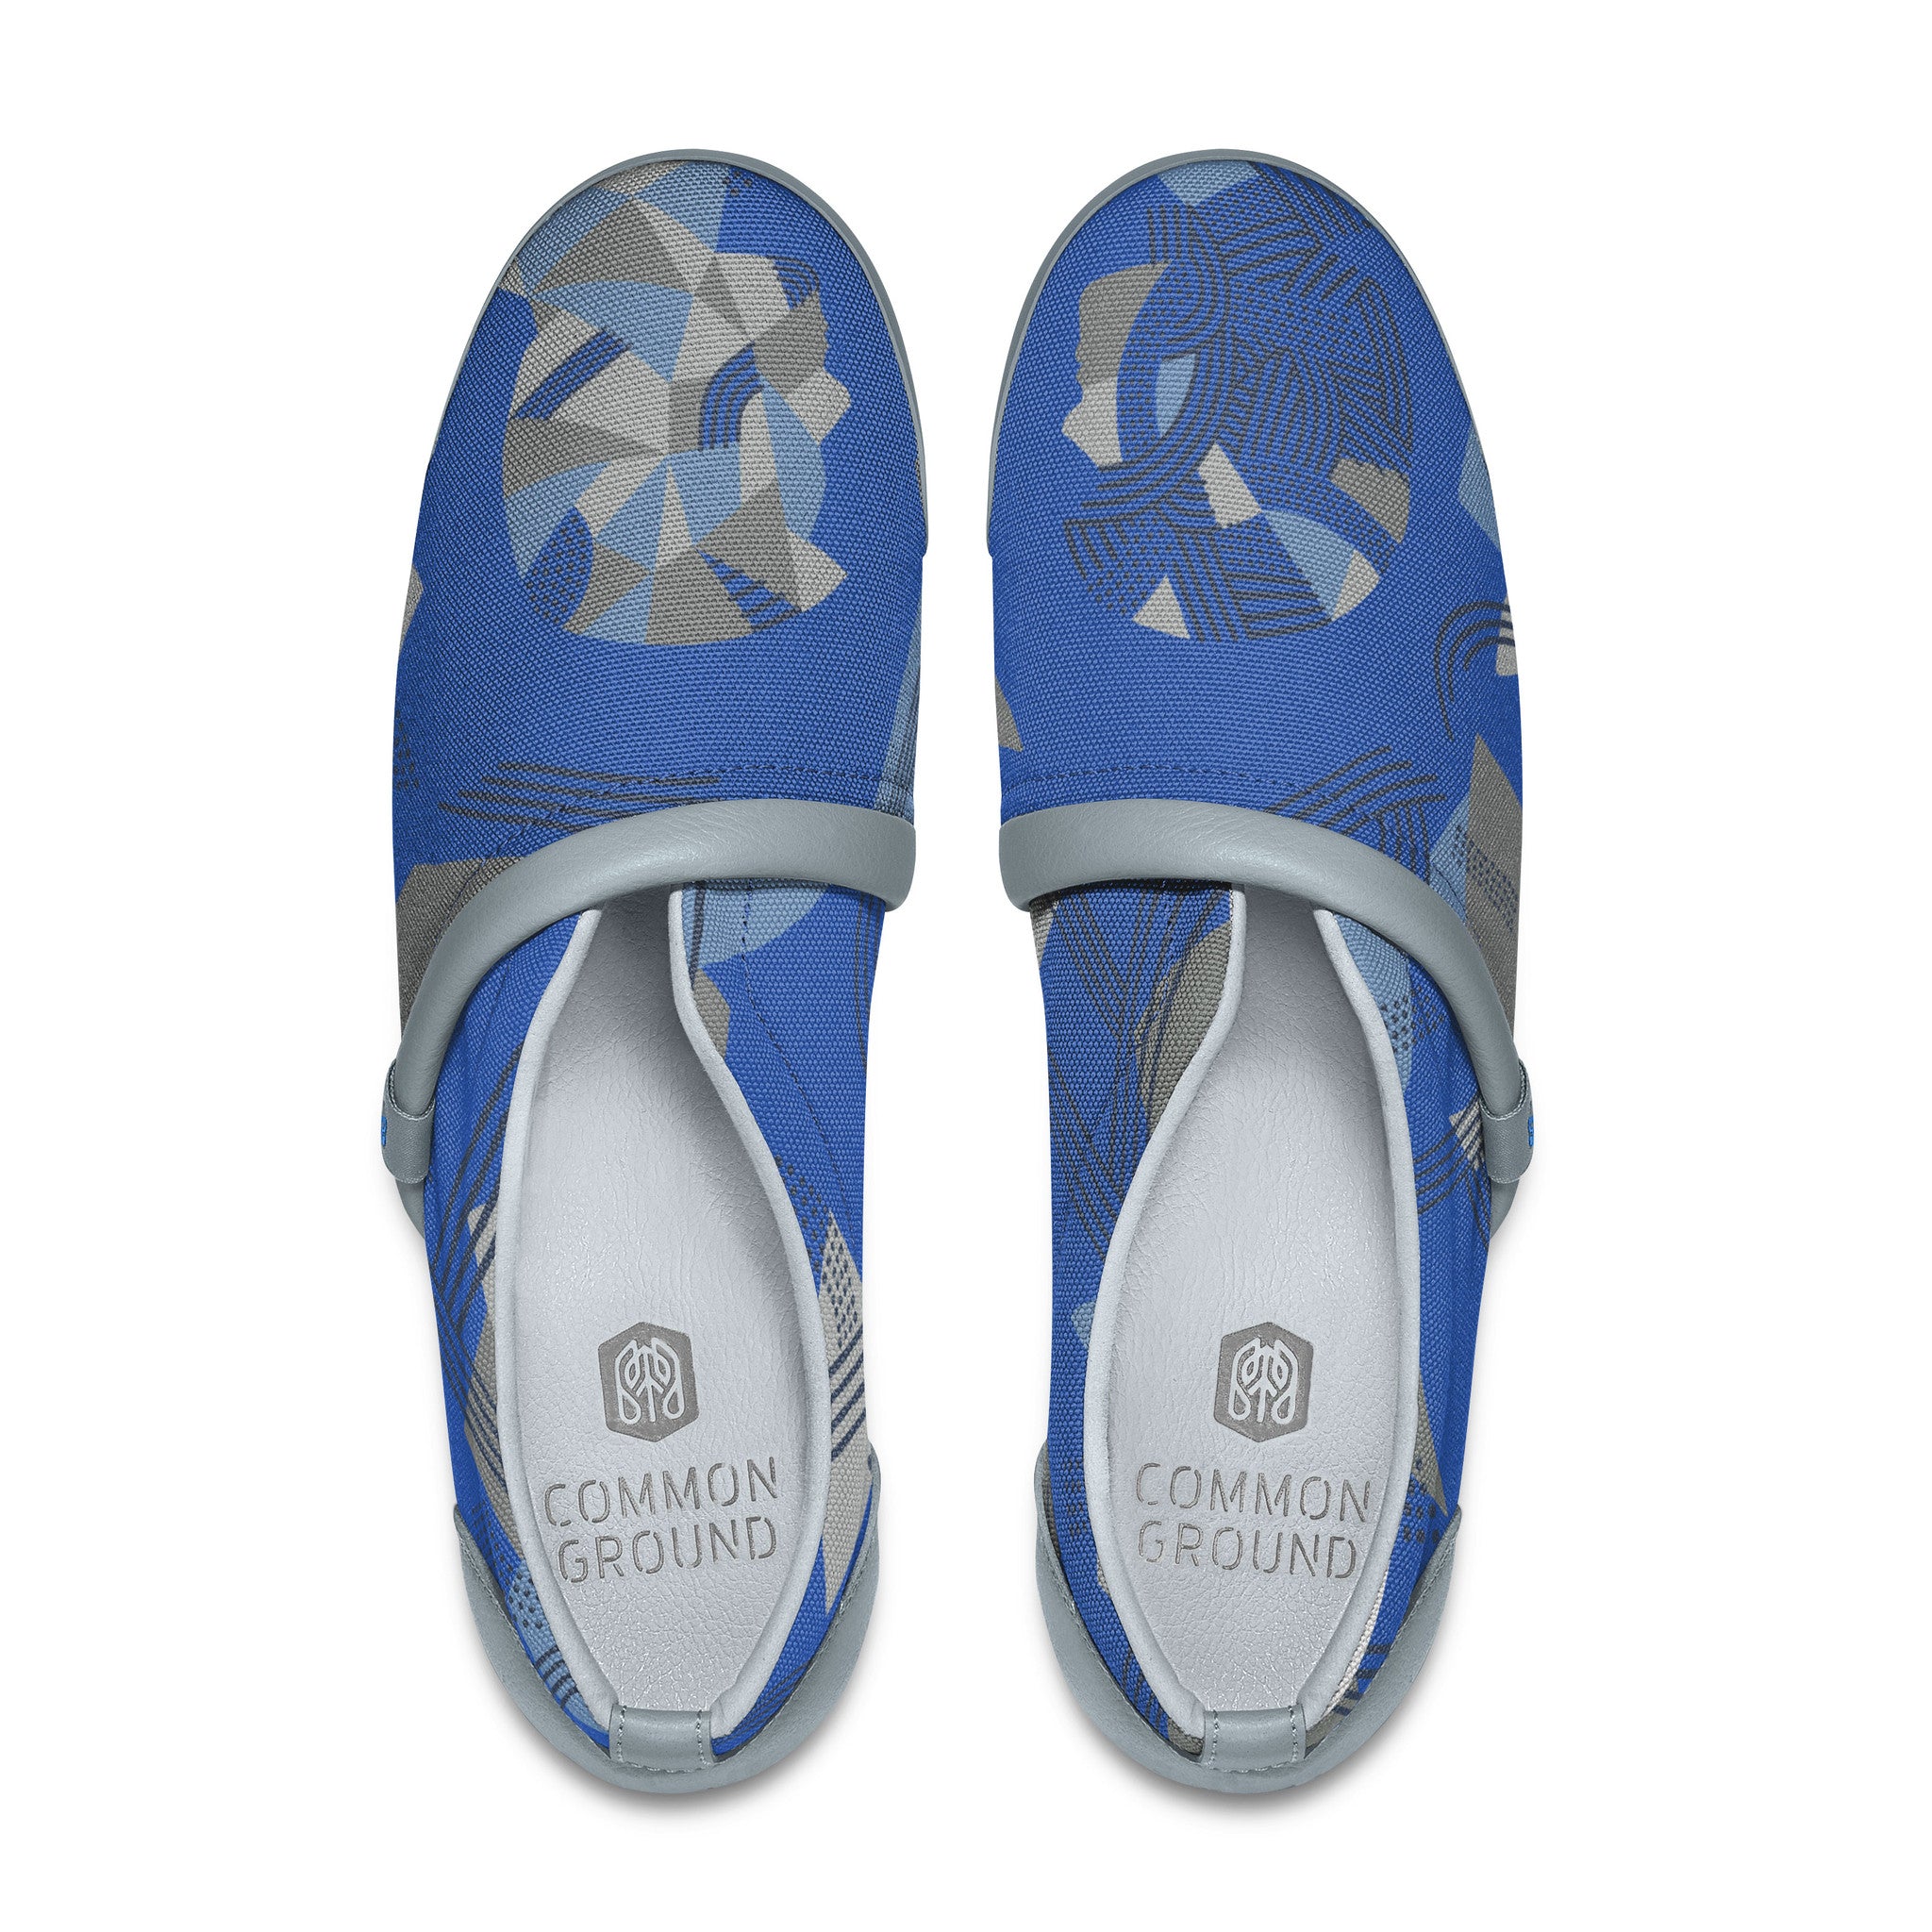 Strong_Blue - Common Ground Footwear Shoes Top View